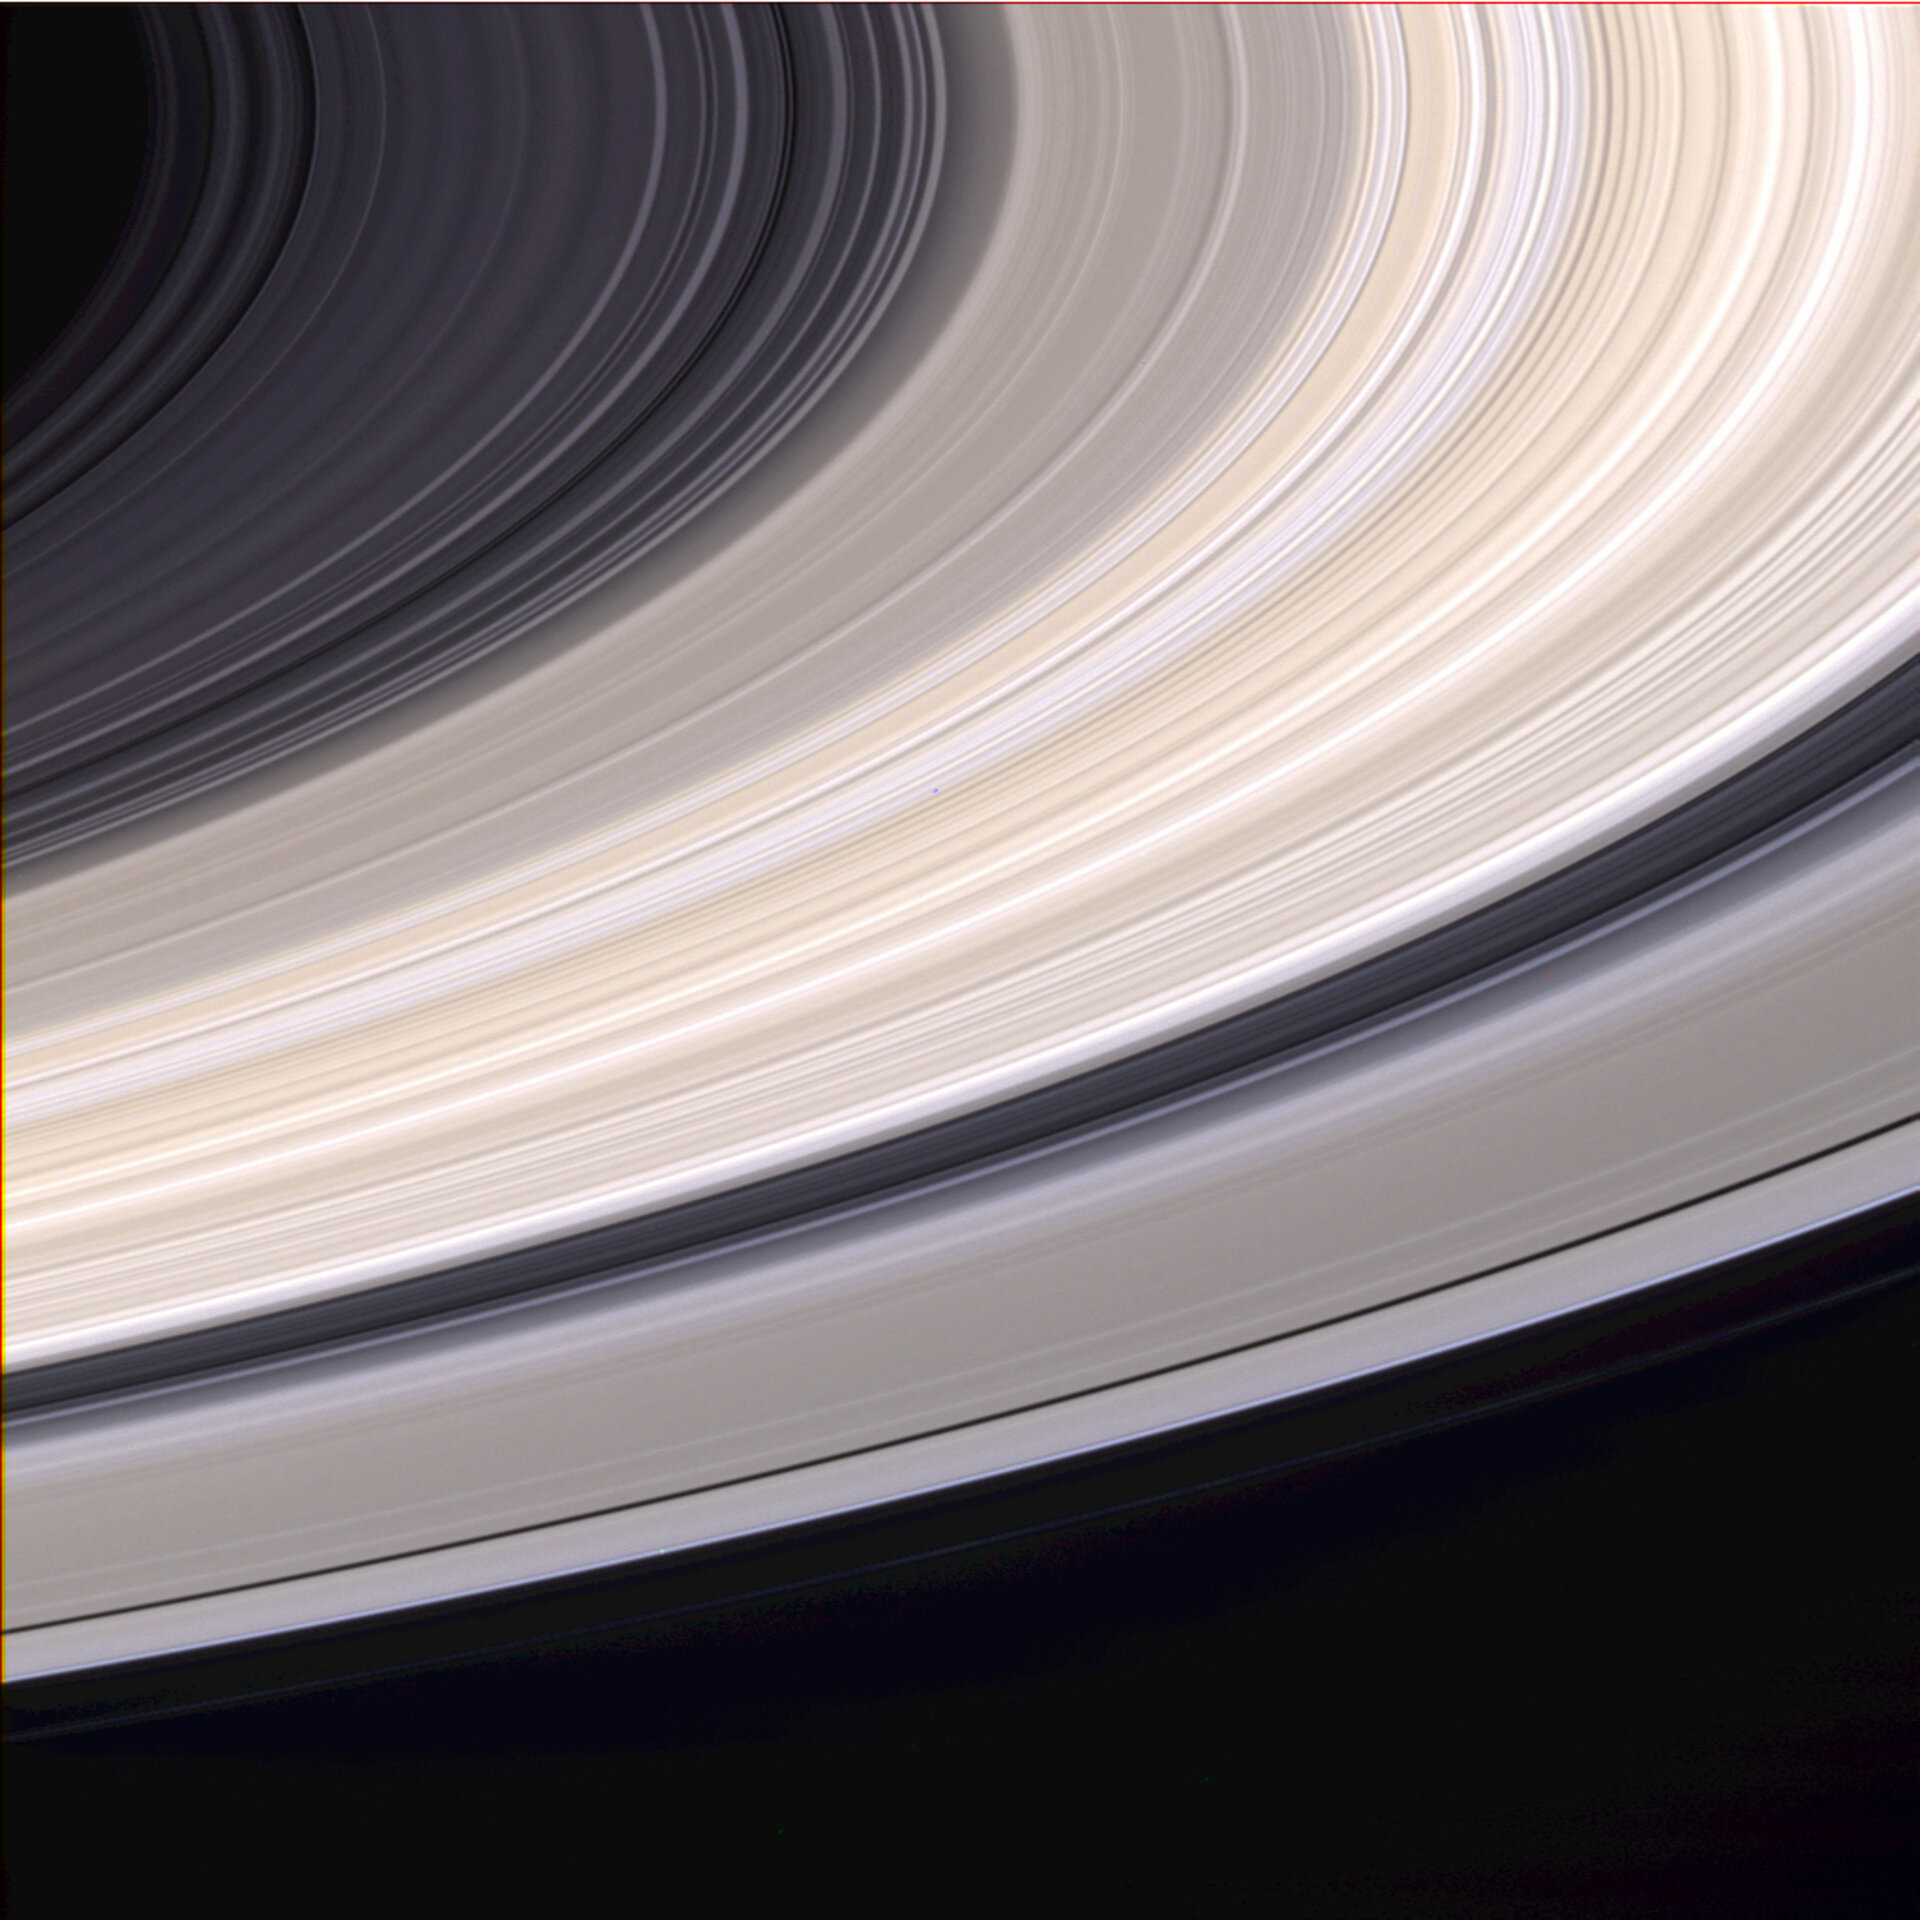 Cassini snaps dazzling photo of a 'Ring-Bow' in Saturn's rings | Fox News